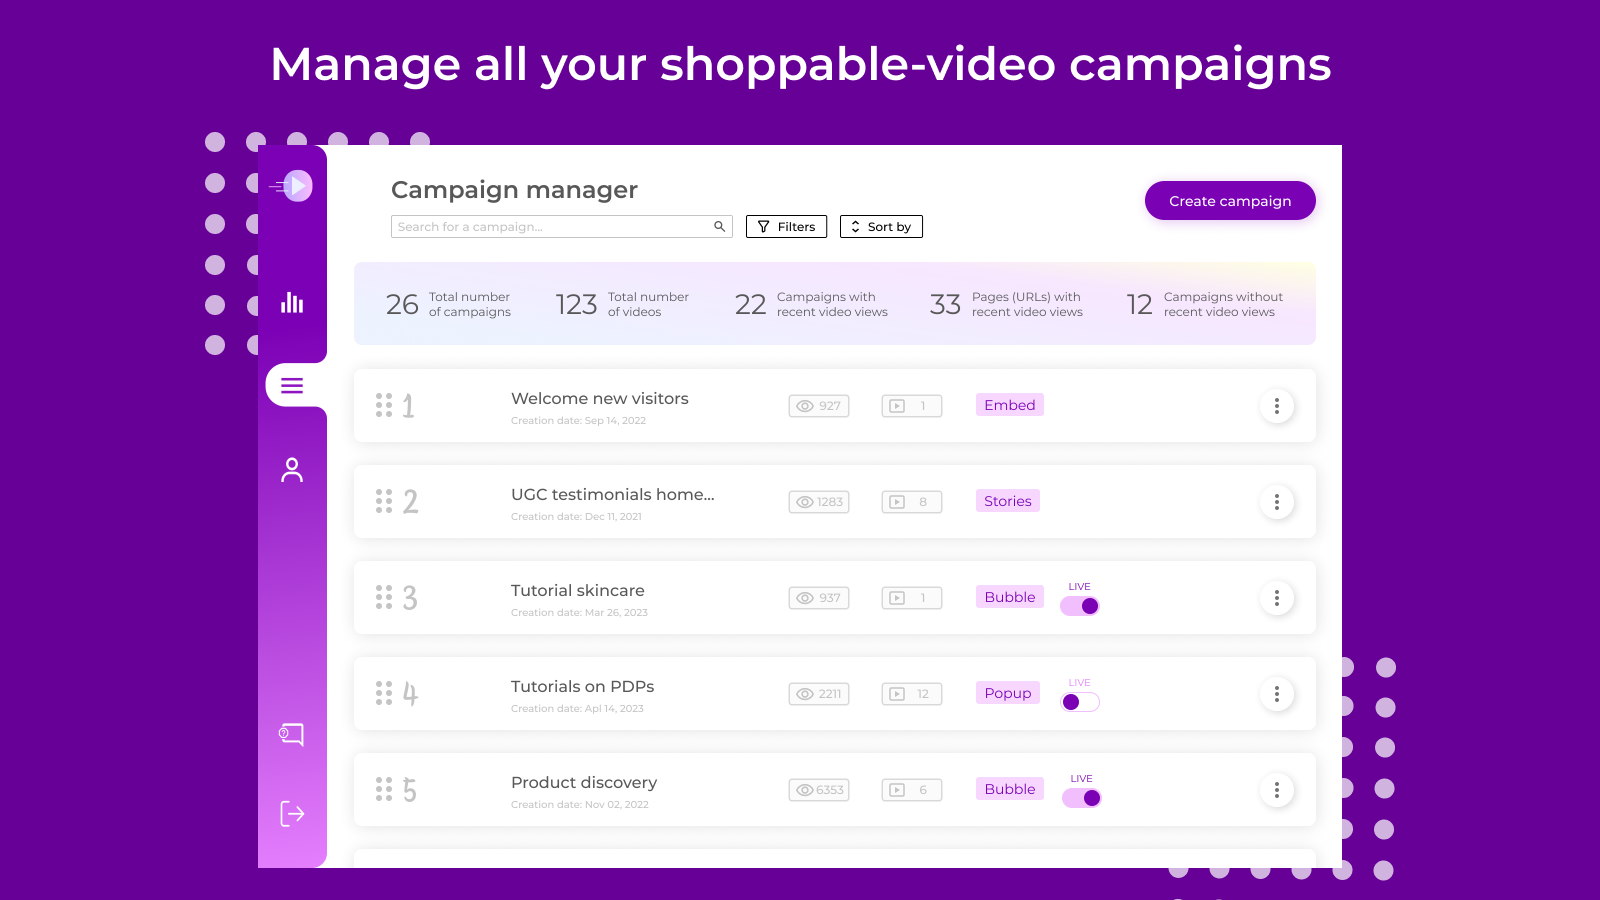 Manage all your shoppable-video campaigns